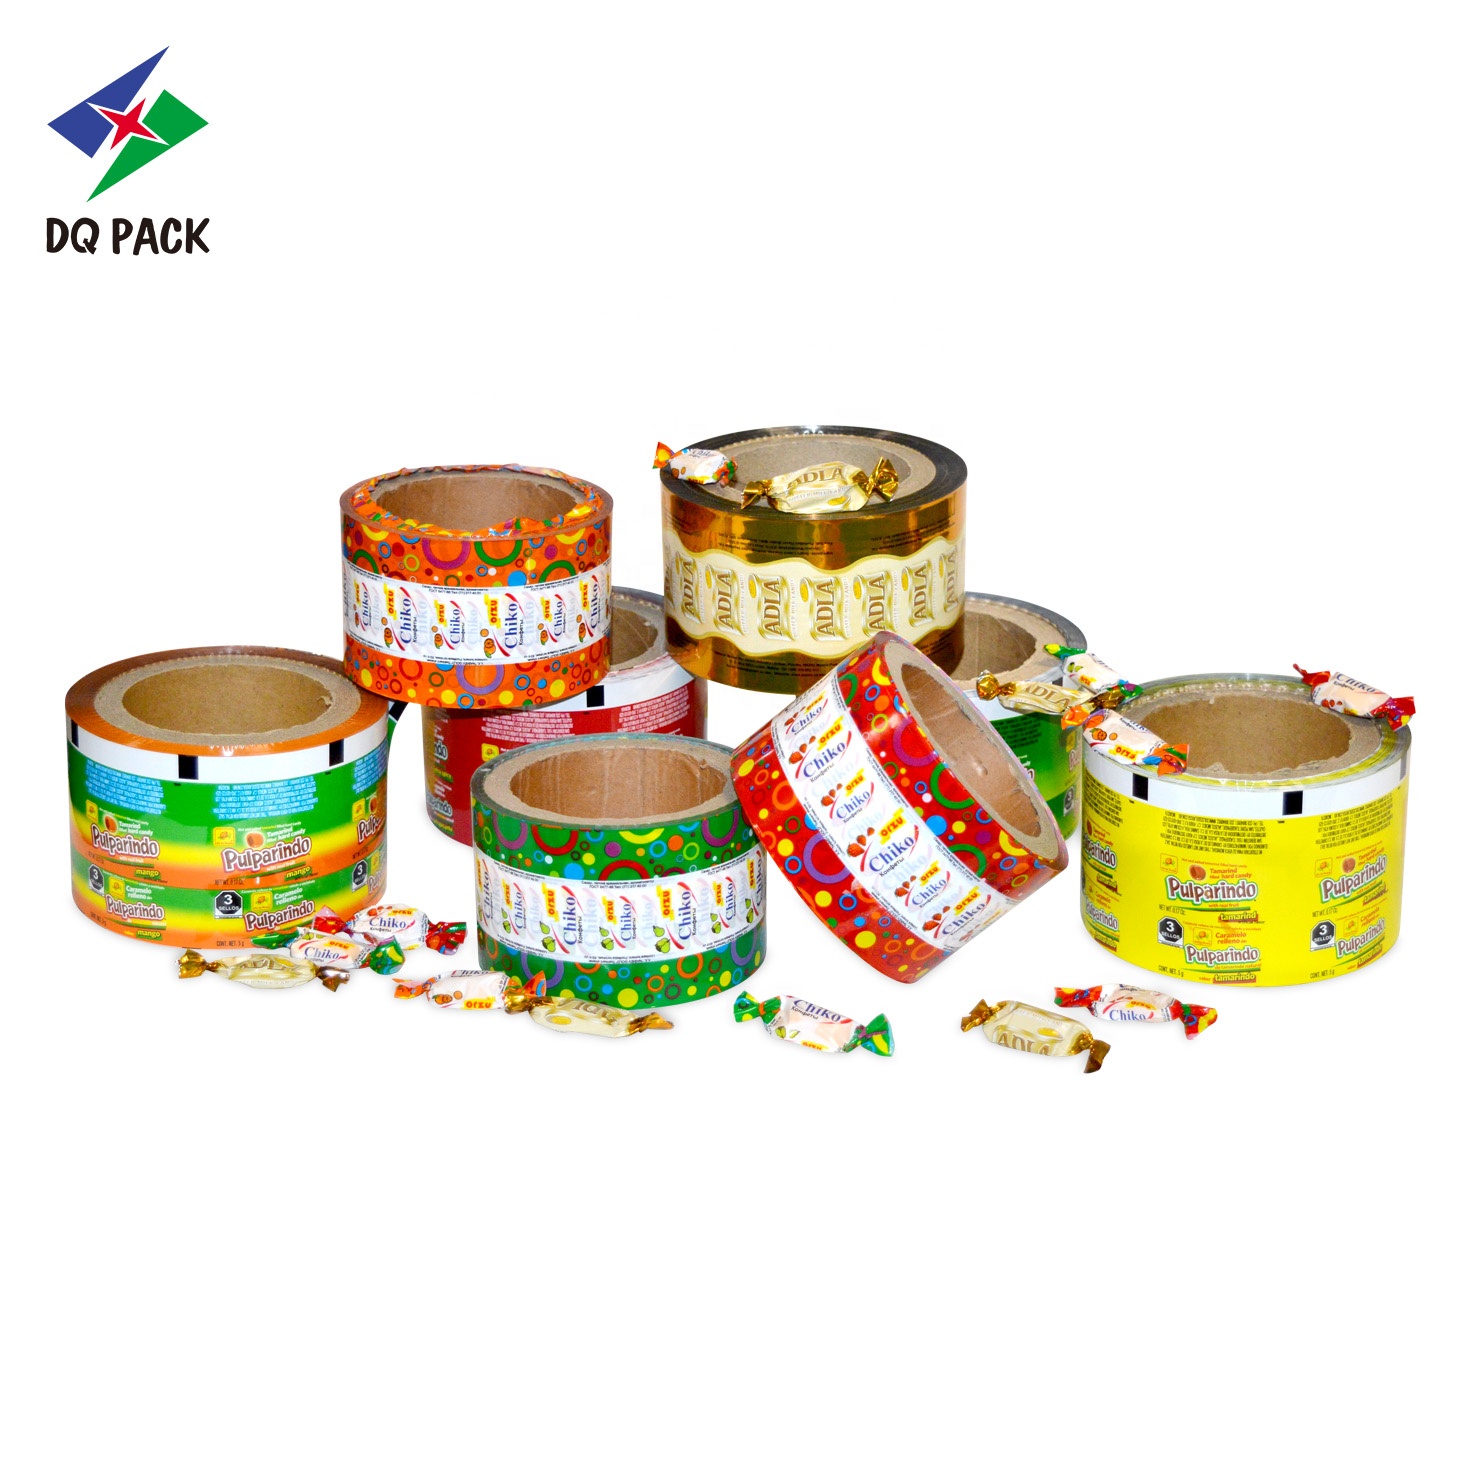 DQ PACK HDPE Candy Cake Candy Chocolate Potato Chips Coffee Tea Milk Powder Packaging Roll Film Roll